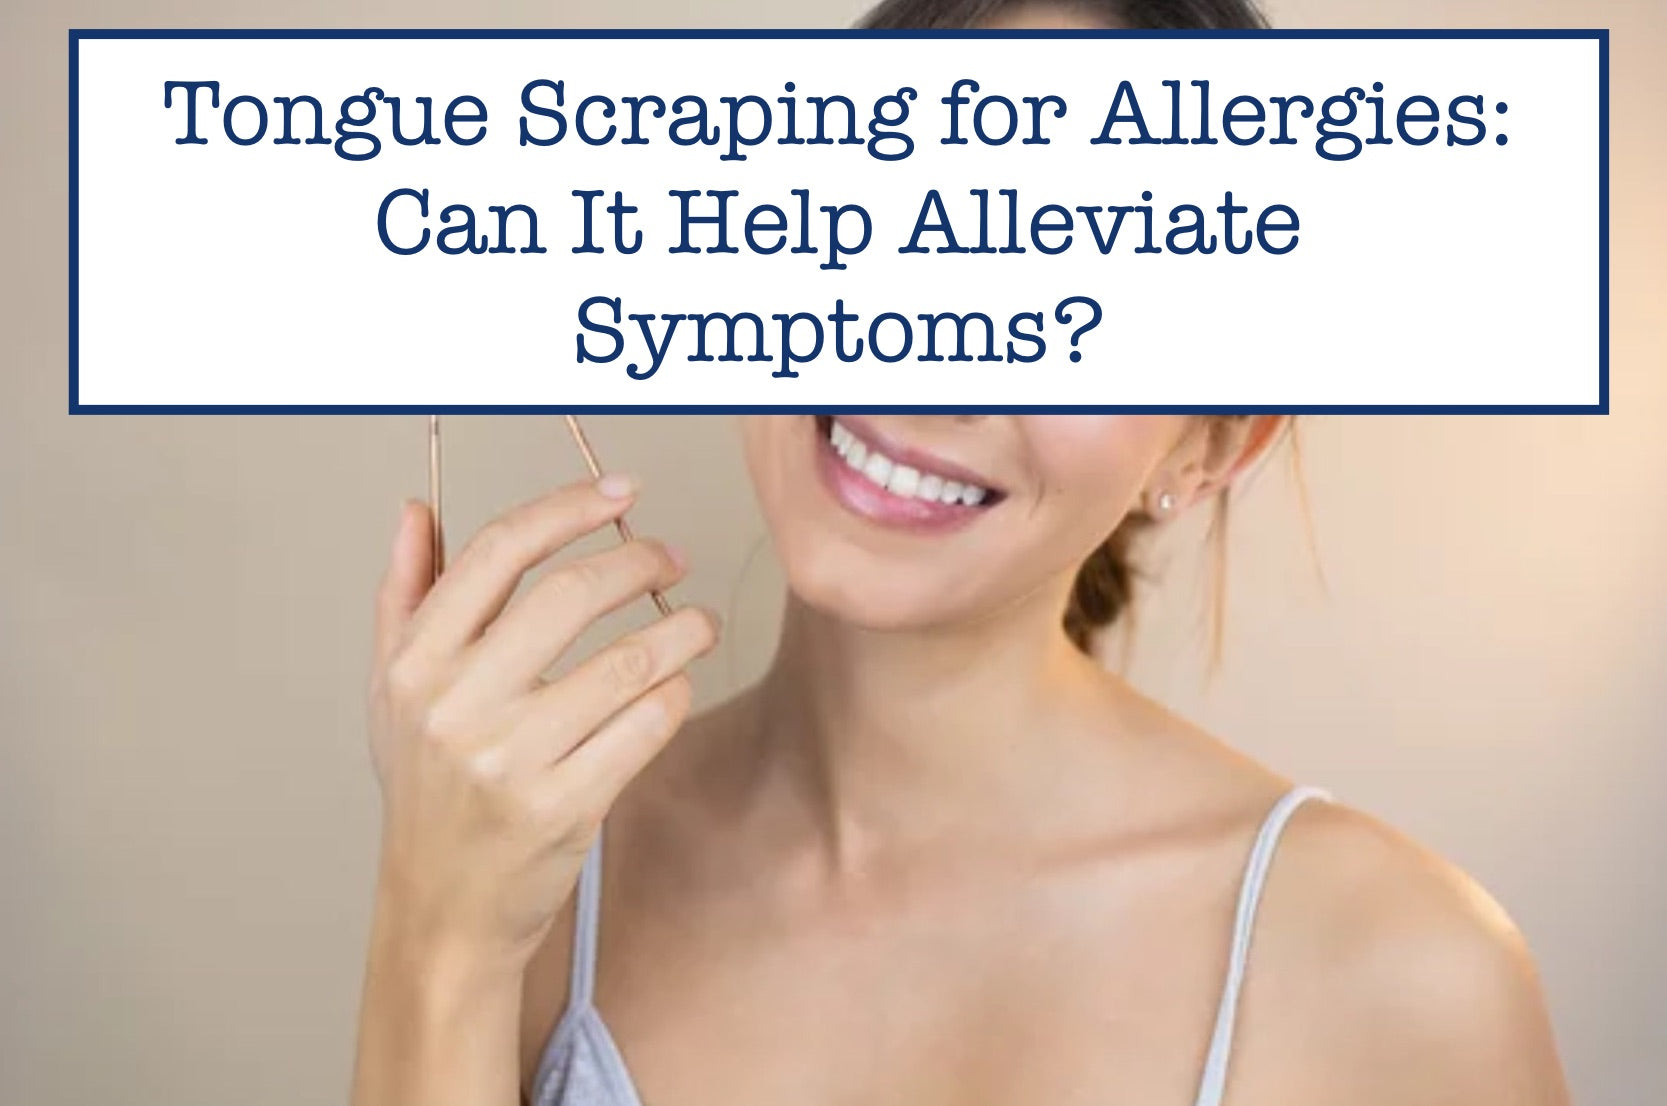 Tongue Scraping for Allergies: Can It Help Alleviate Symptoms?